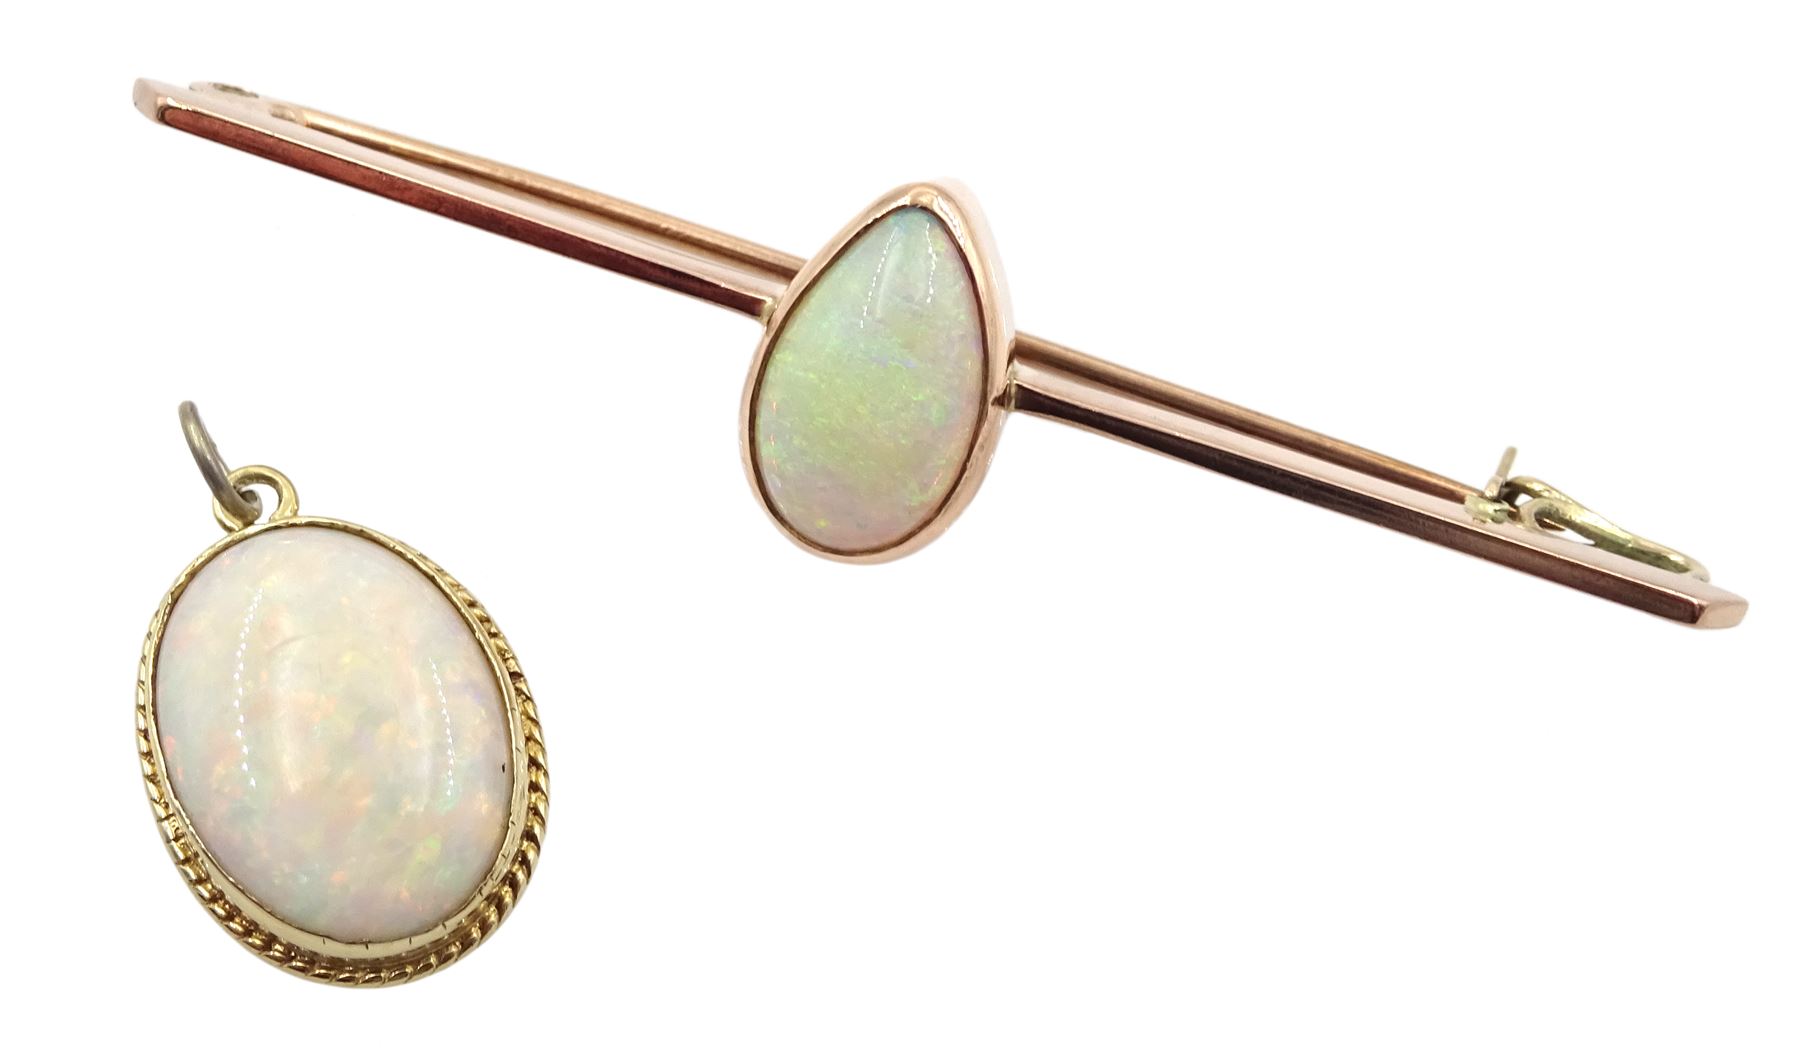 Early 20th century 9ct rose gold pear shaped opal bar brooch and an oval opal pendant